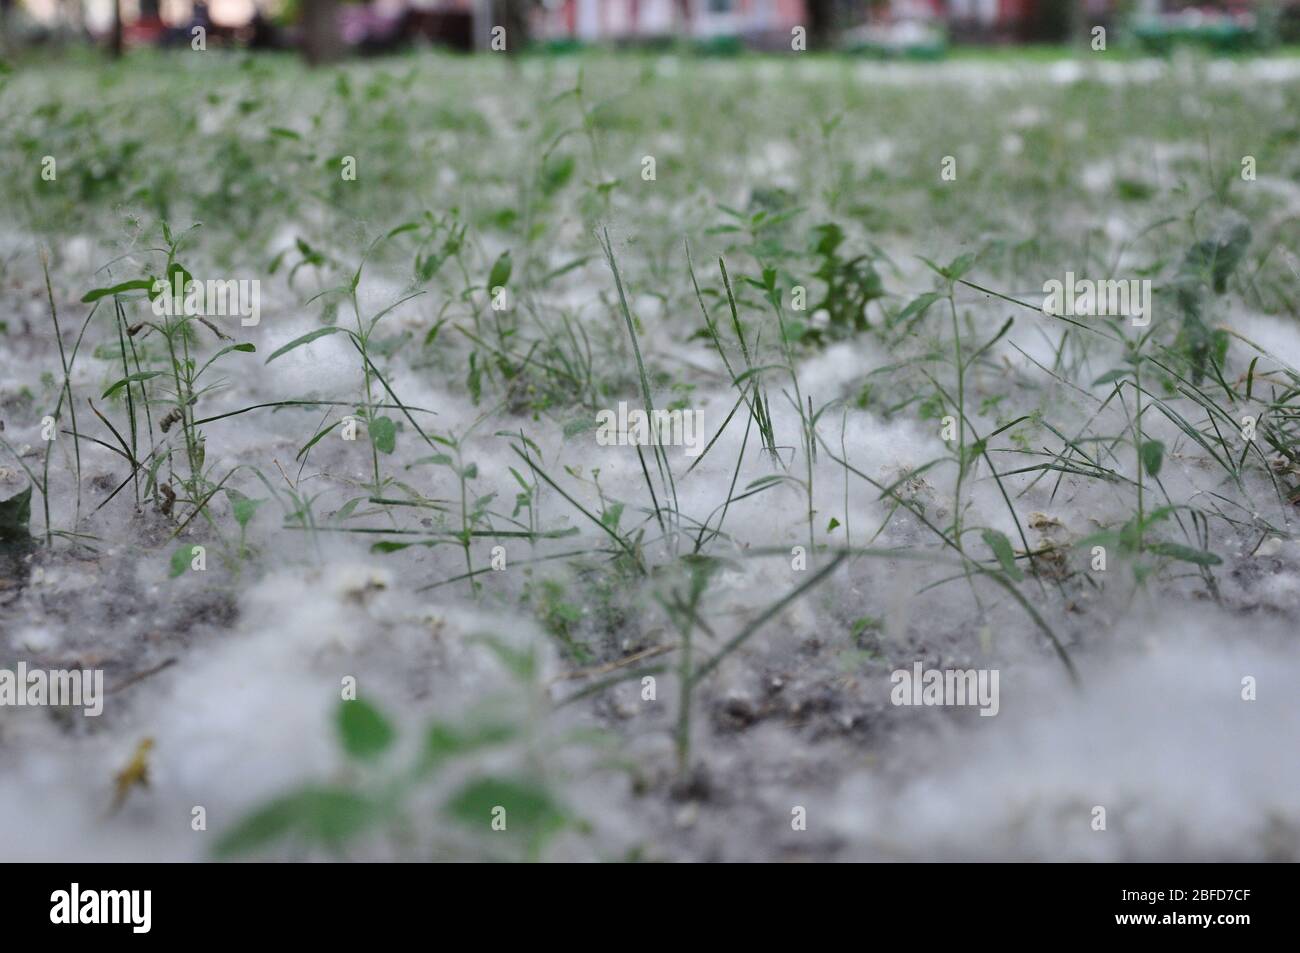 Poplar fluff on the grass in a park. Stock Photo